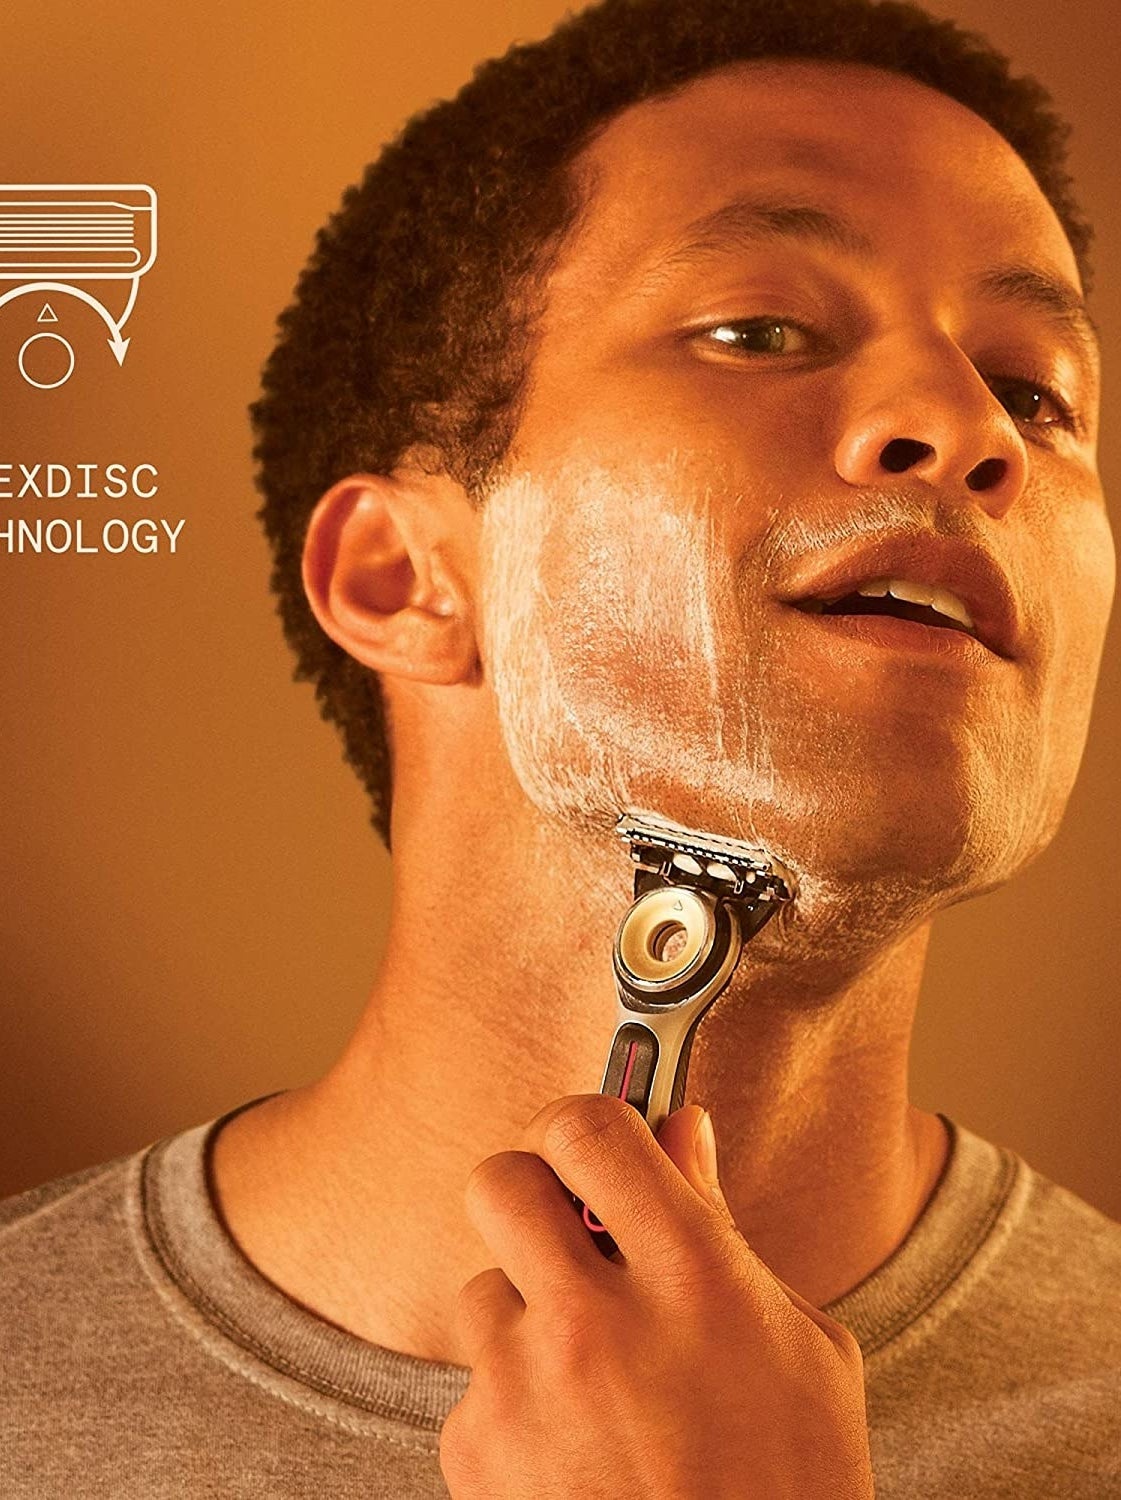 person shaving with the heated razor